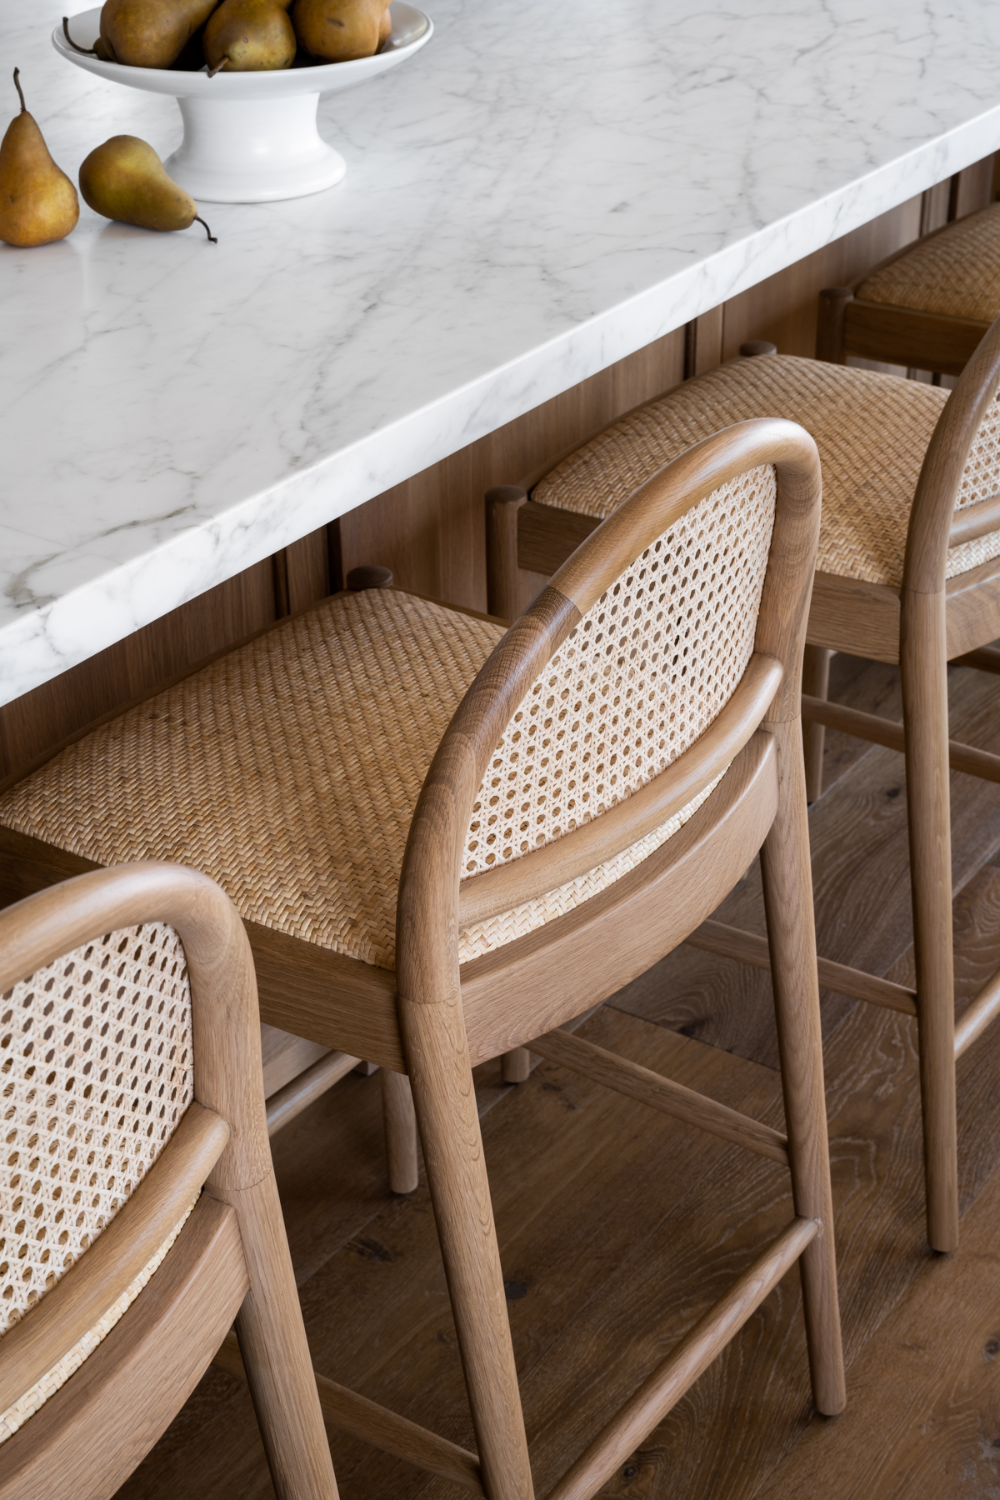 Functional Style: Comfortable Seating with Kitchen Chairs